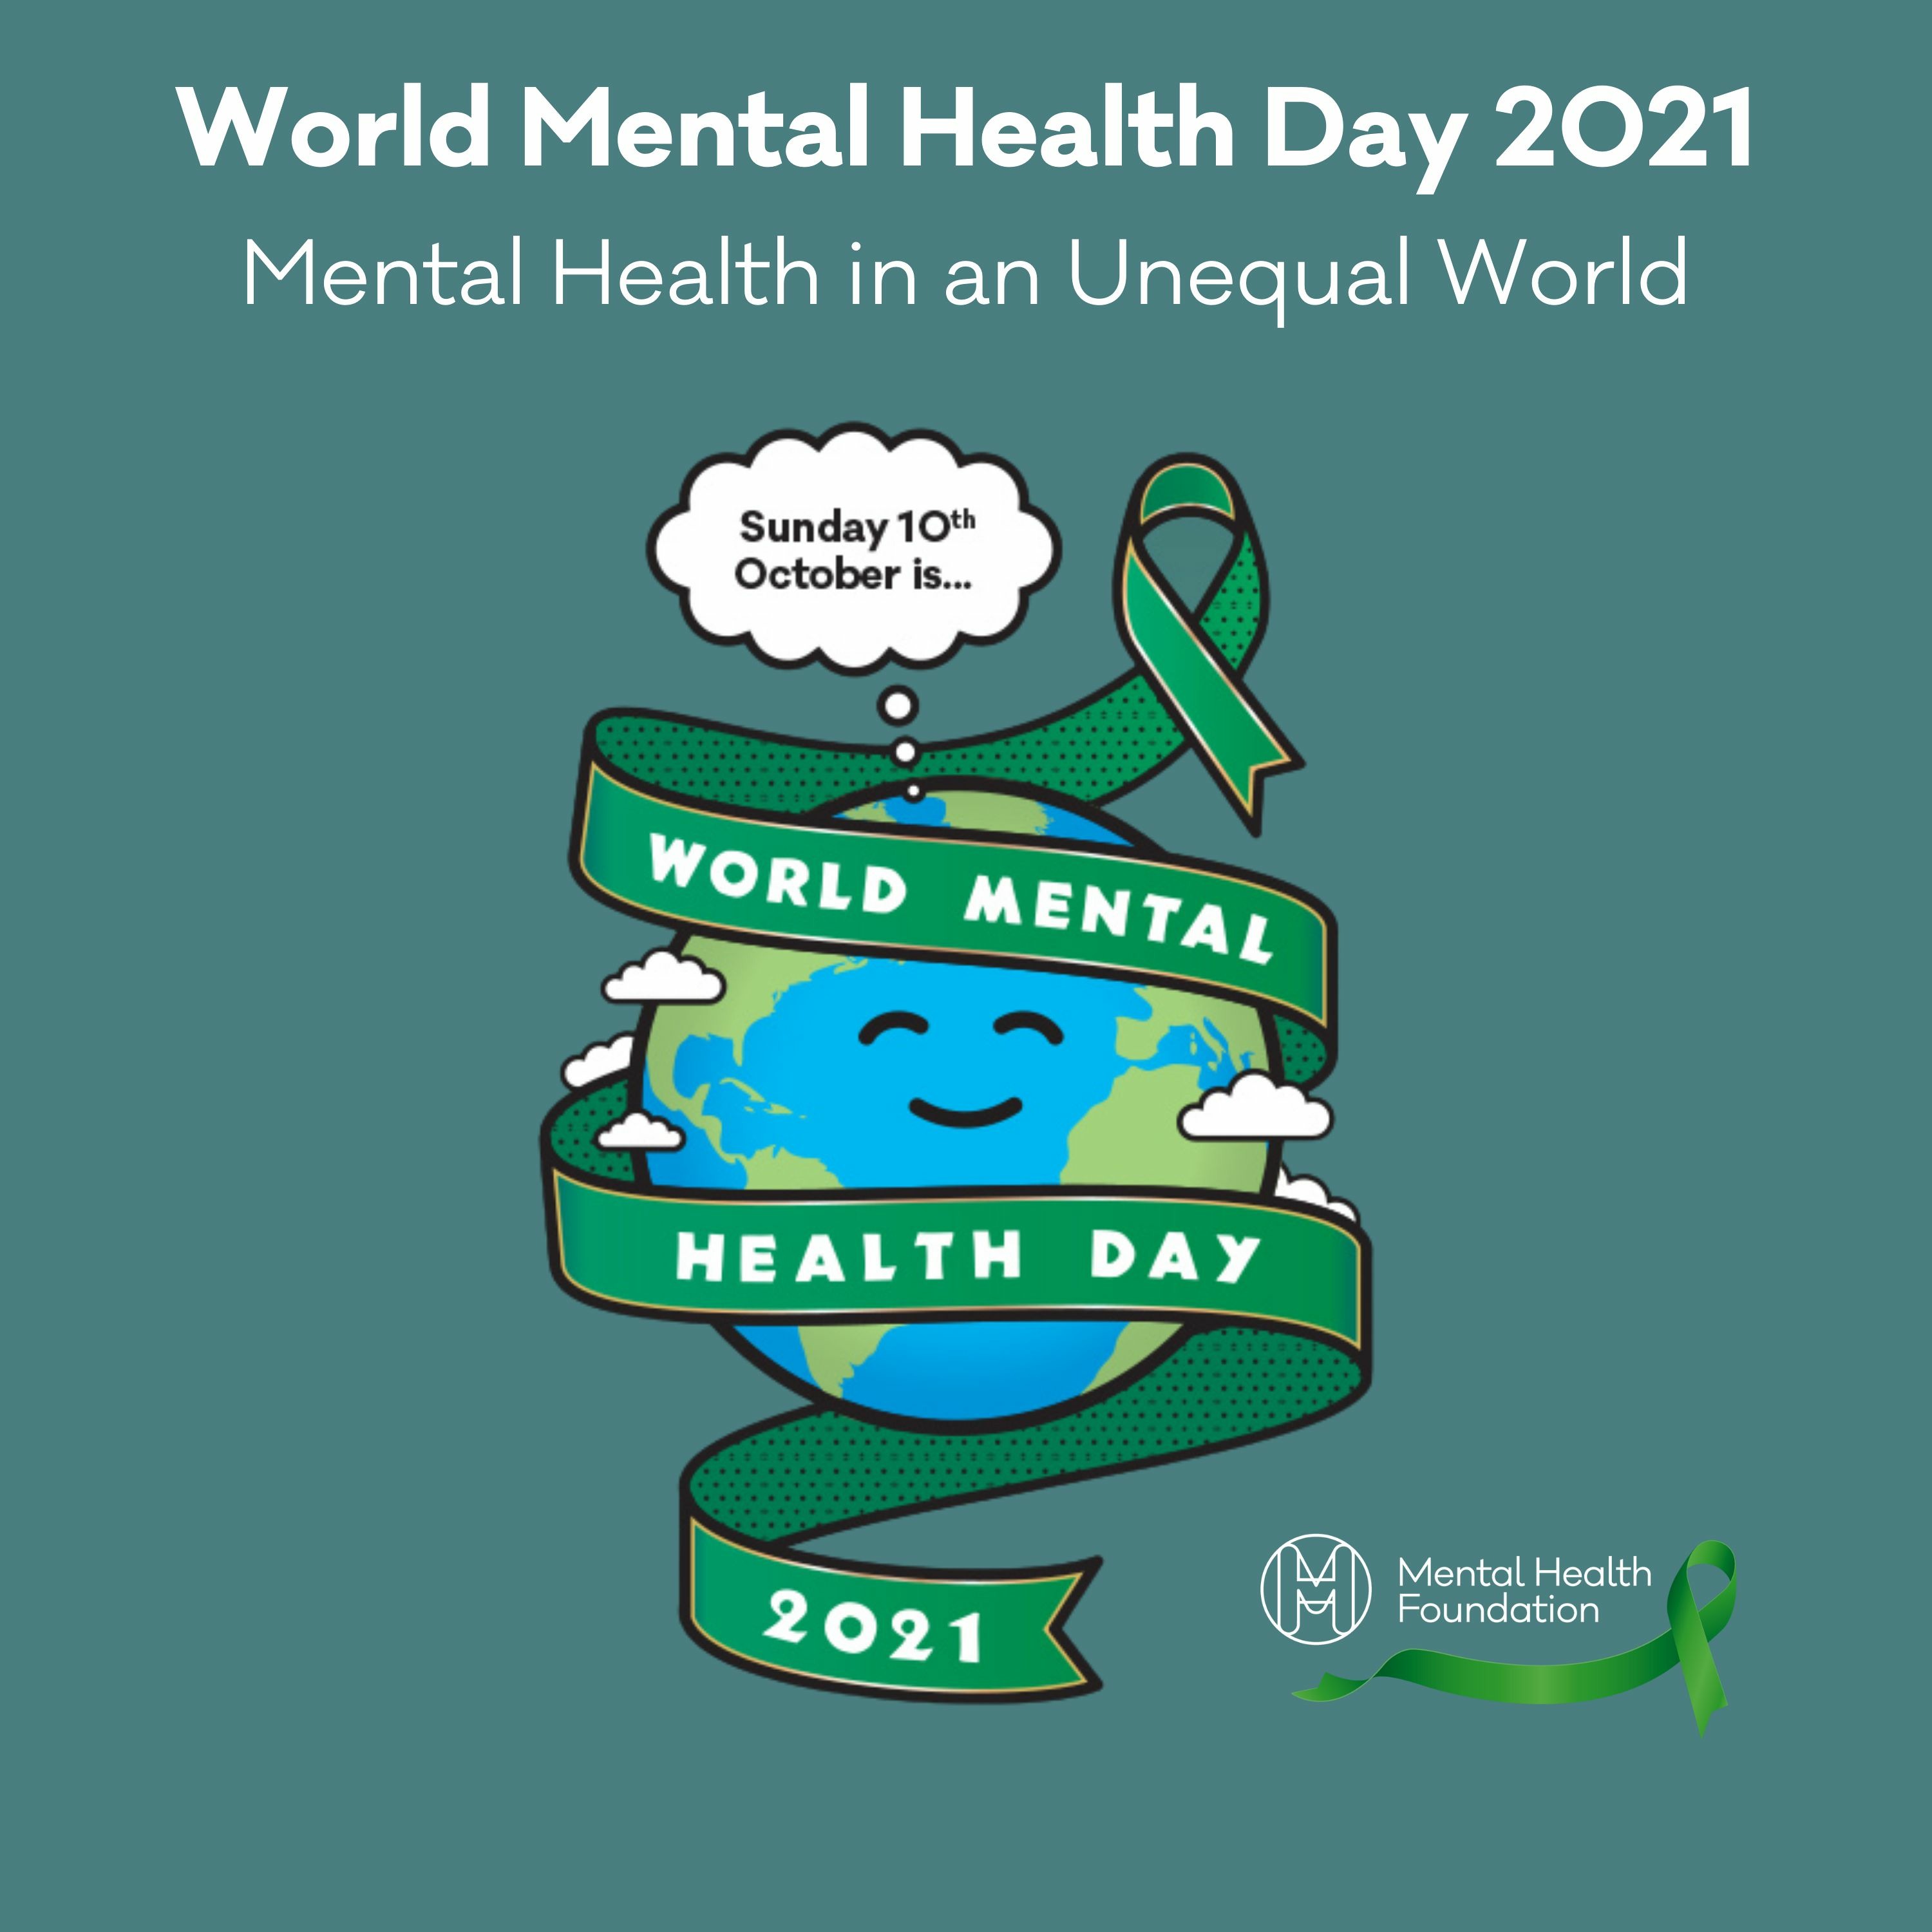 Mental Health Foundation podcast - Mental Health in an unequal world